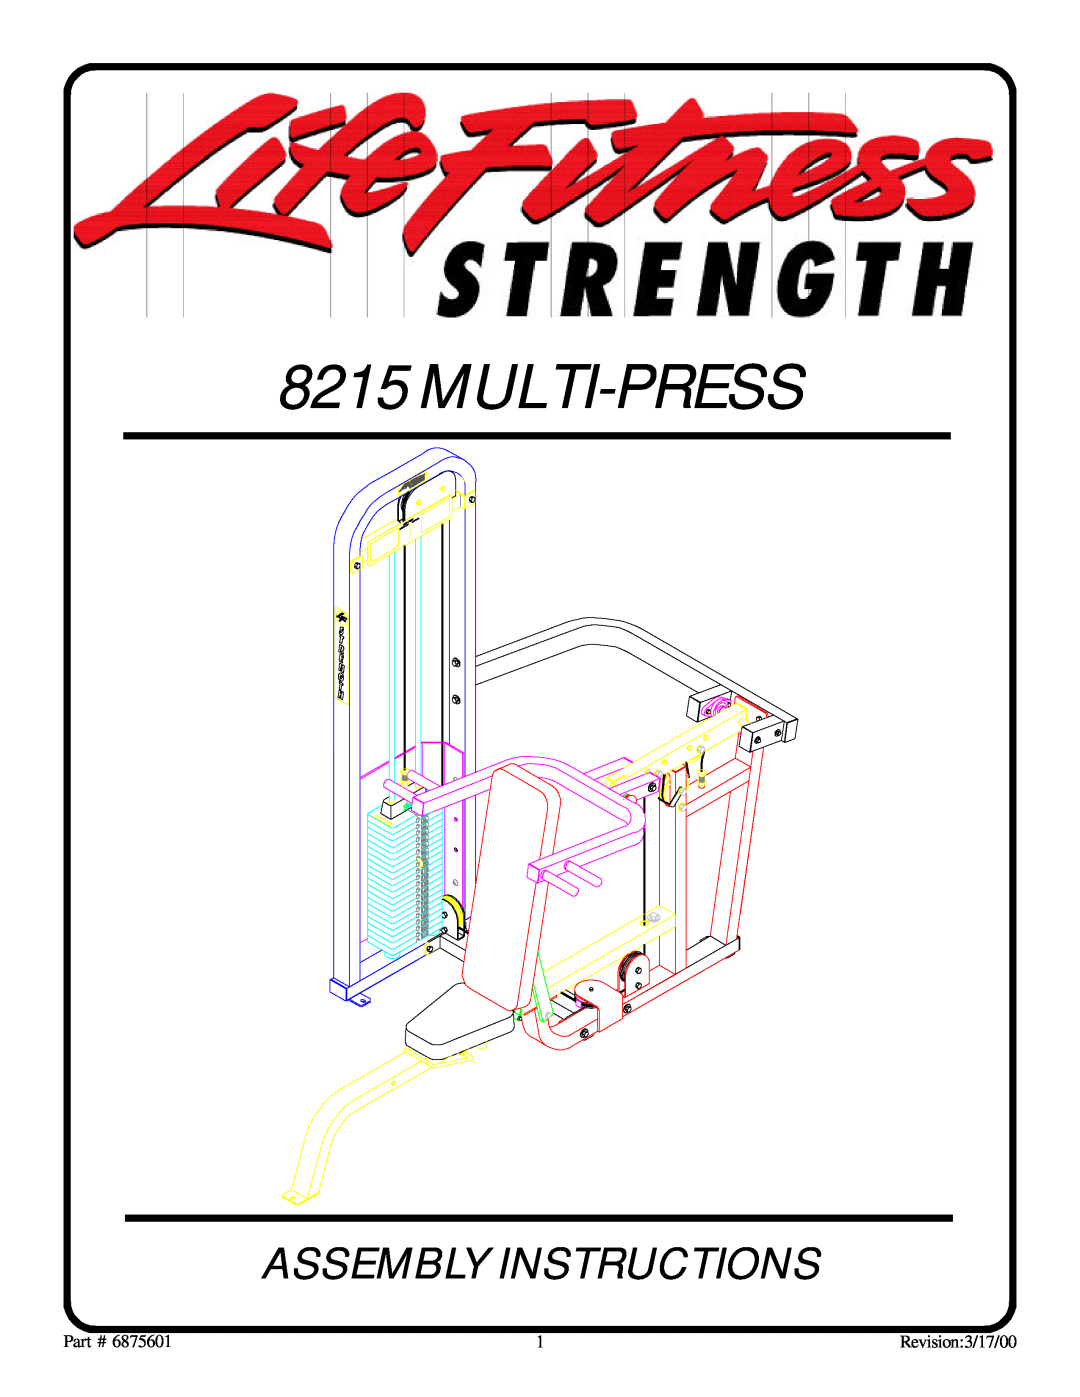 Life Fitness 8215 manual Multi-Press, Assembly Instructions 